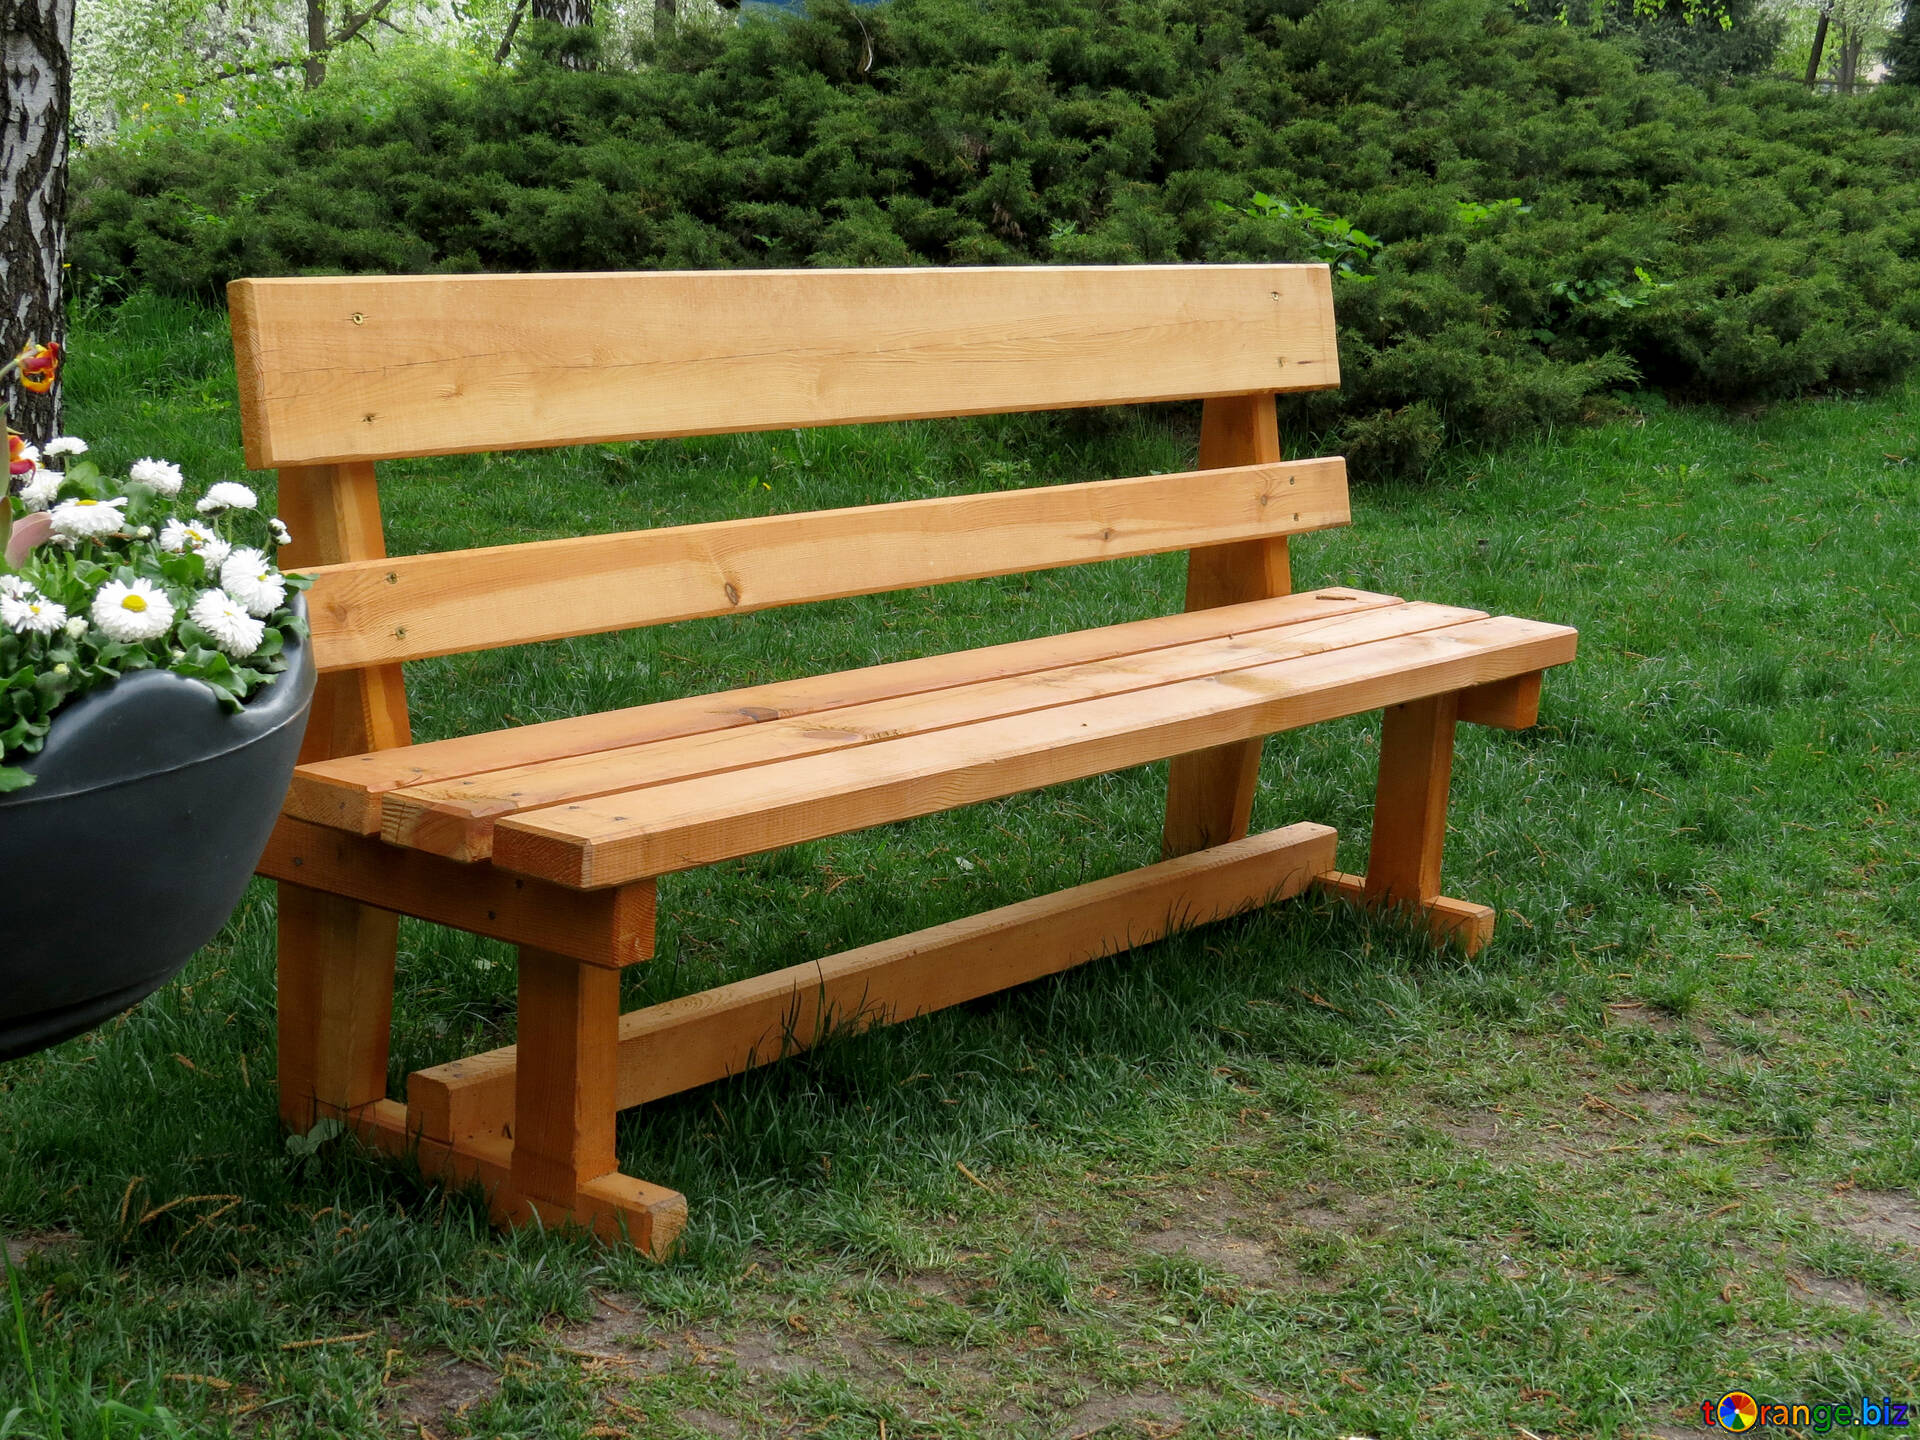 Garden furniture image wooden bench in the park images furniture № 31327 |   ~ free pics on cc-by license